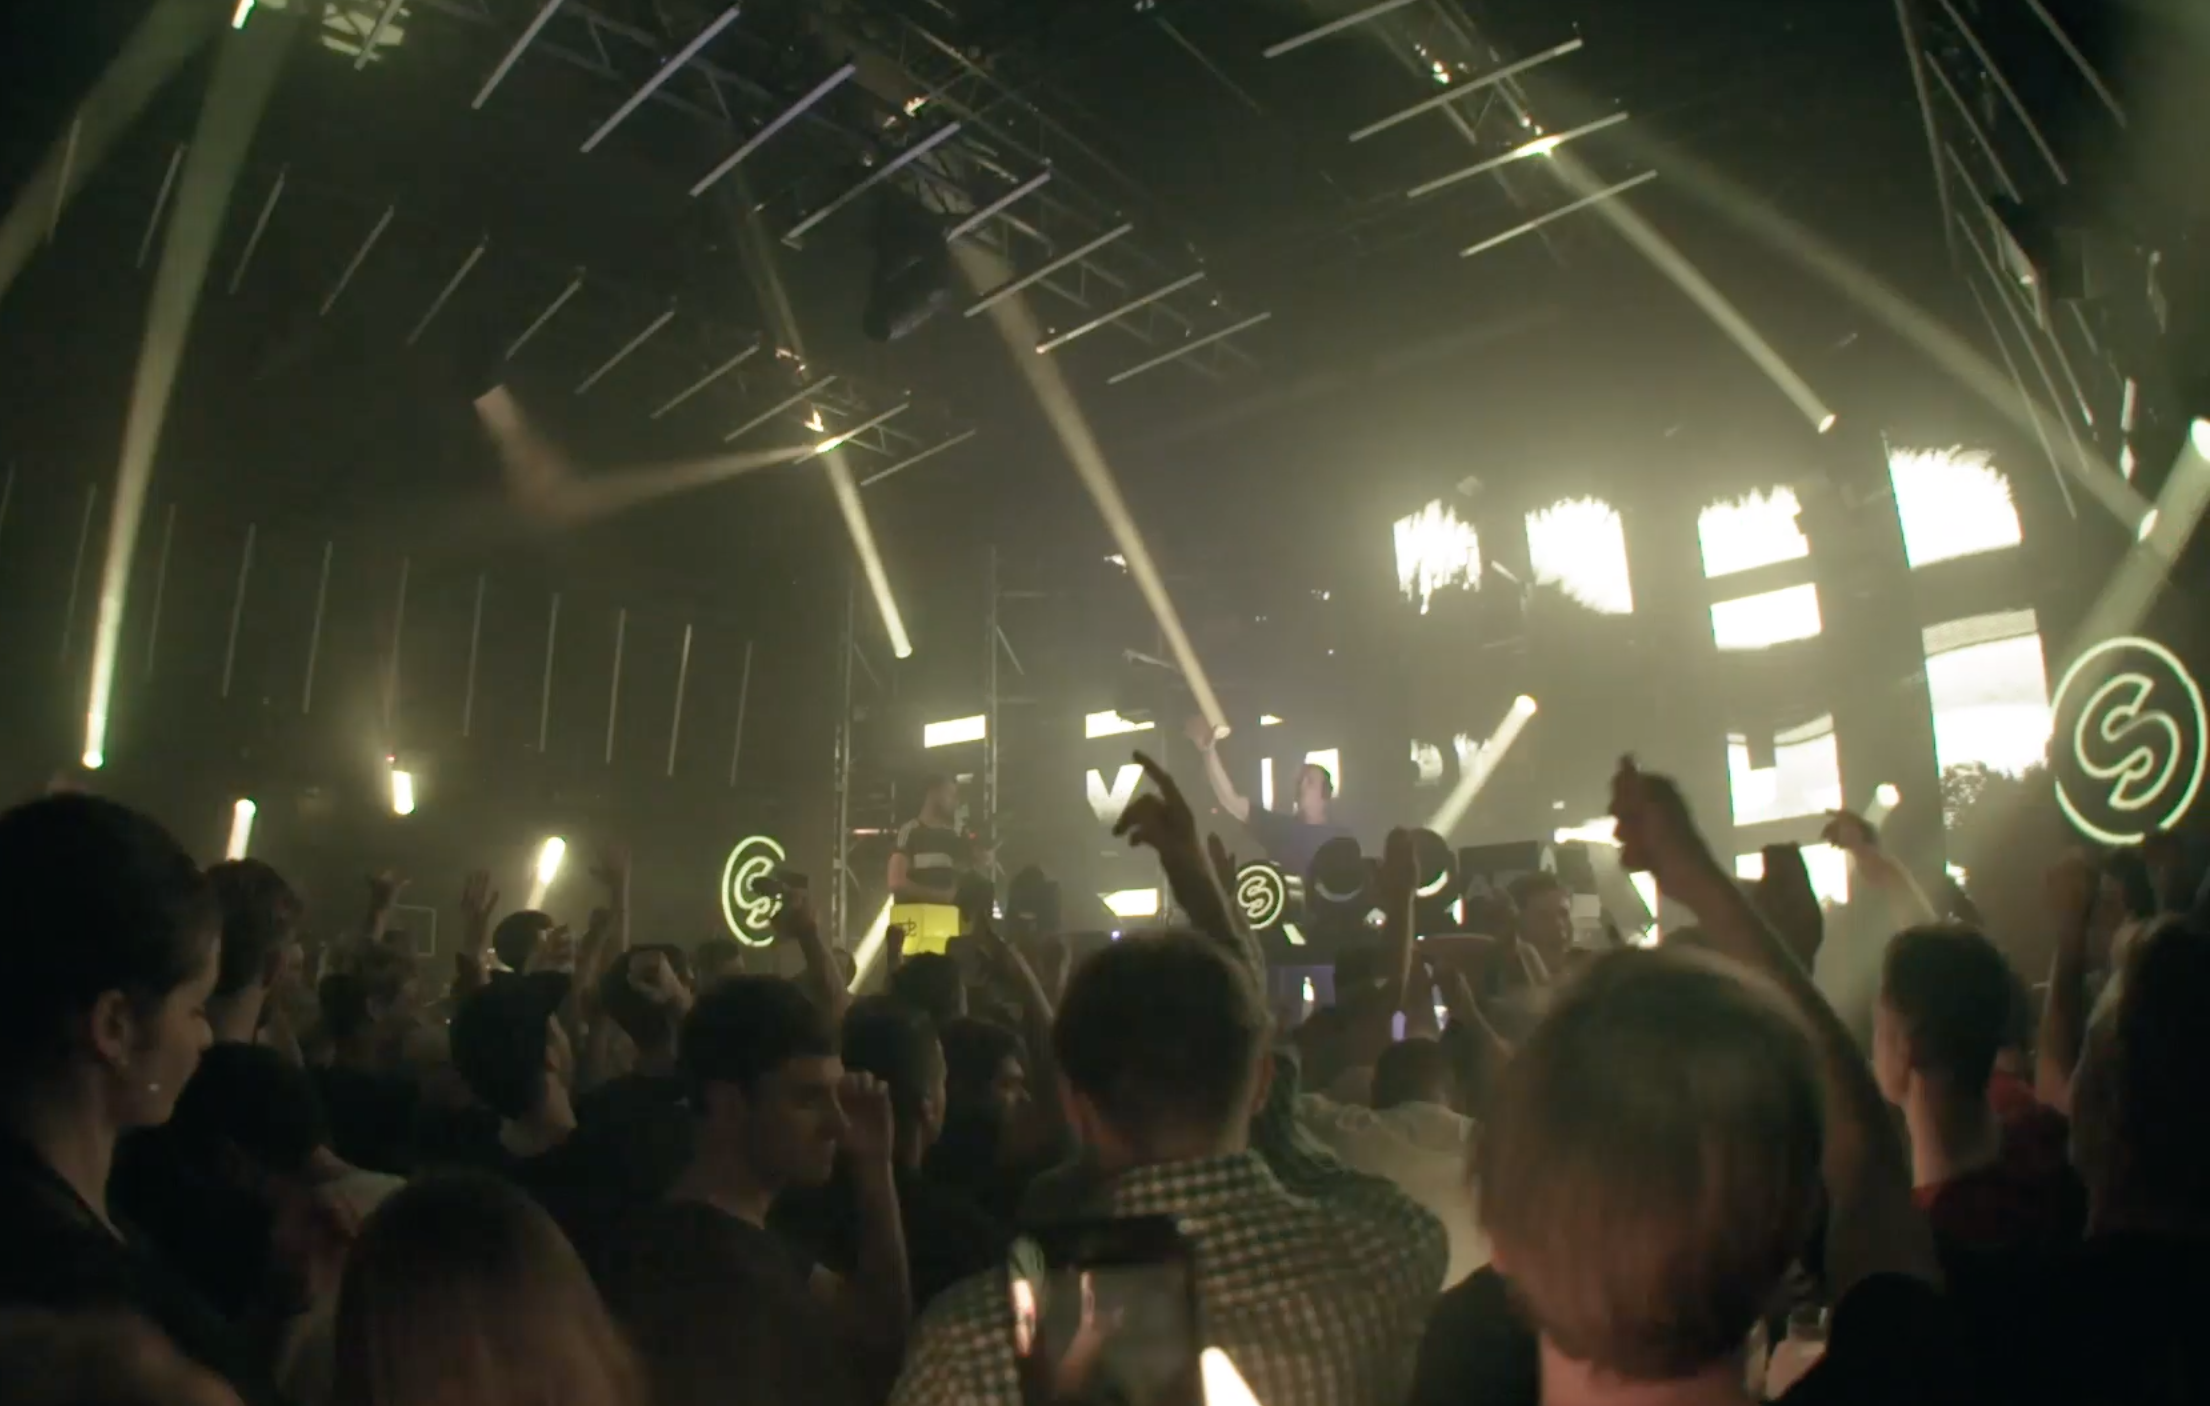 Check out how amazing Spinnin' Sessions x ADE was last year!